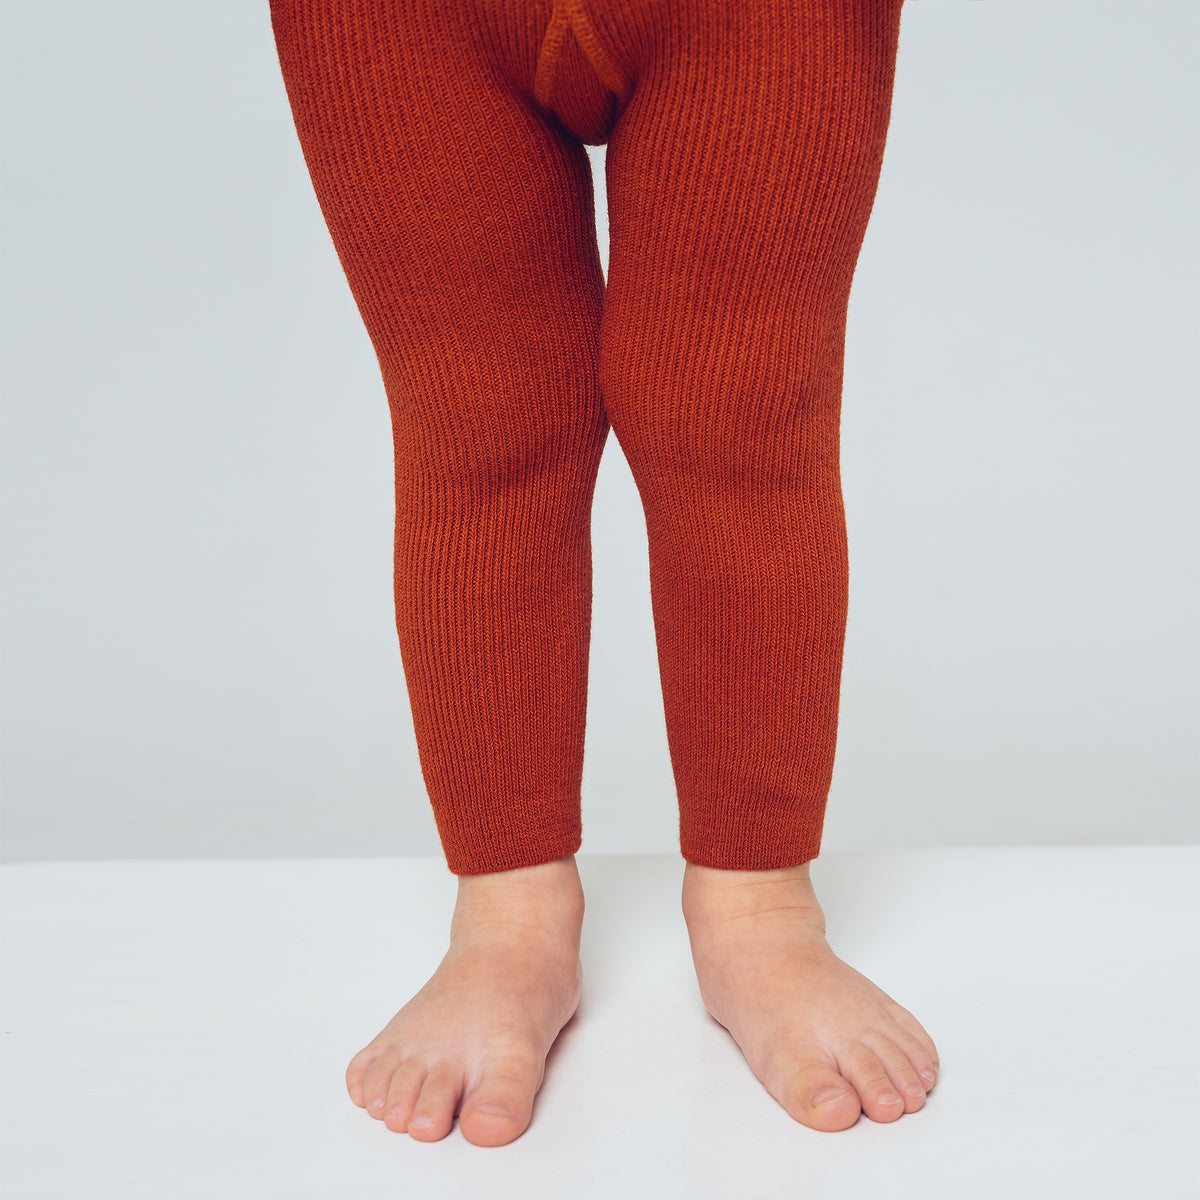 PEQNE Leggings Footless Tights with Braces in Rusty Red